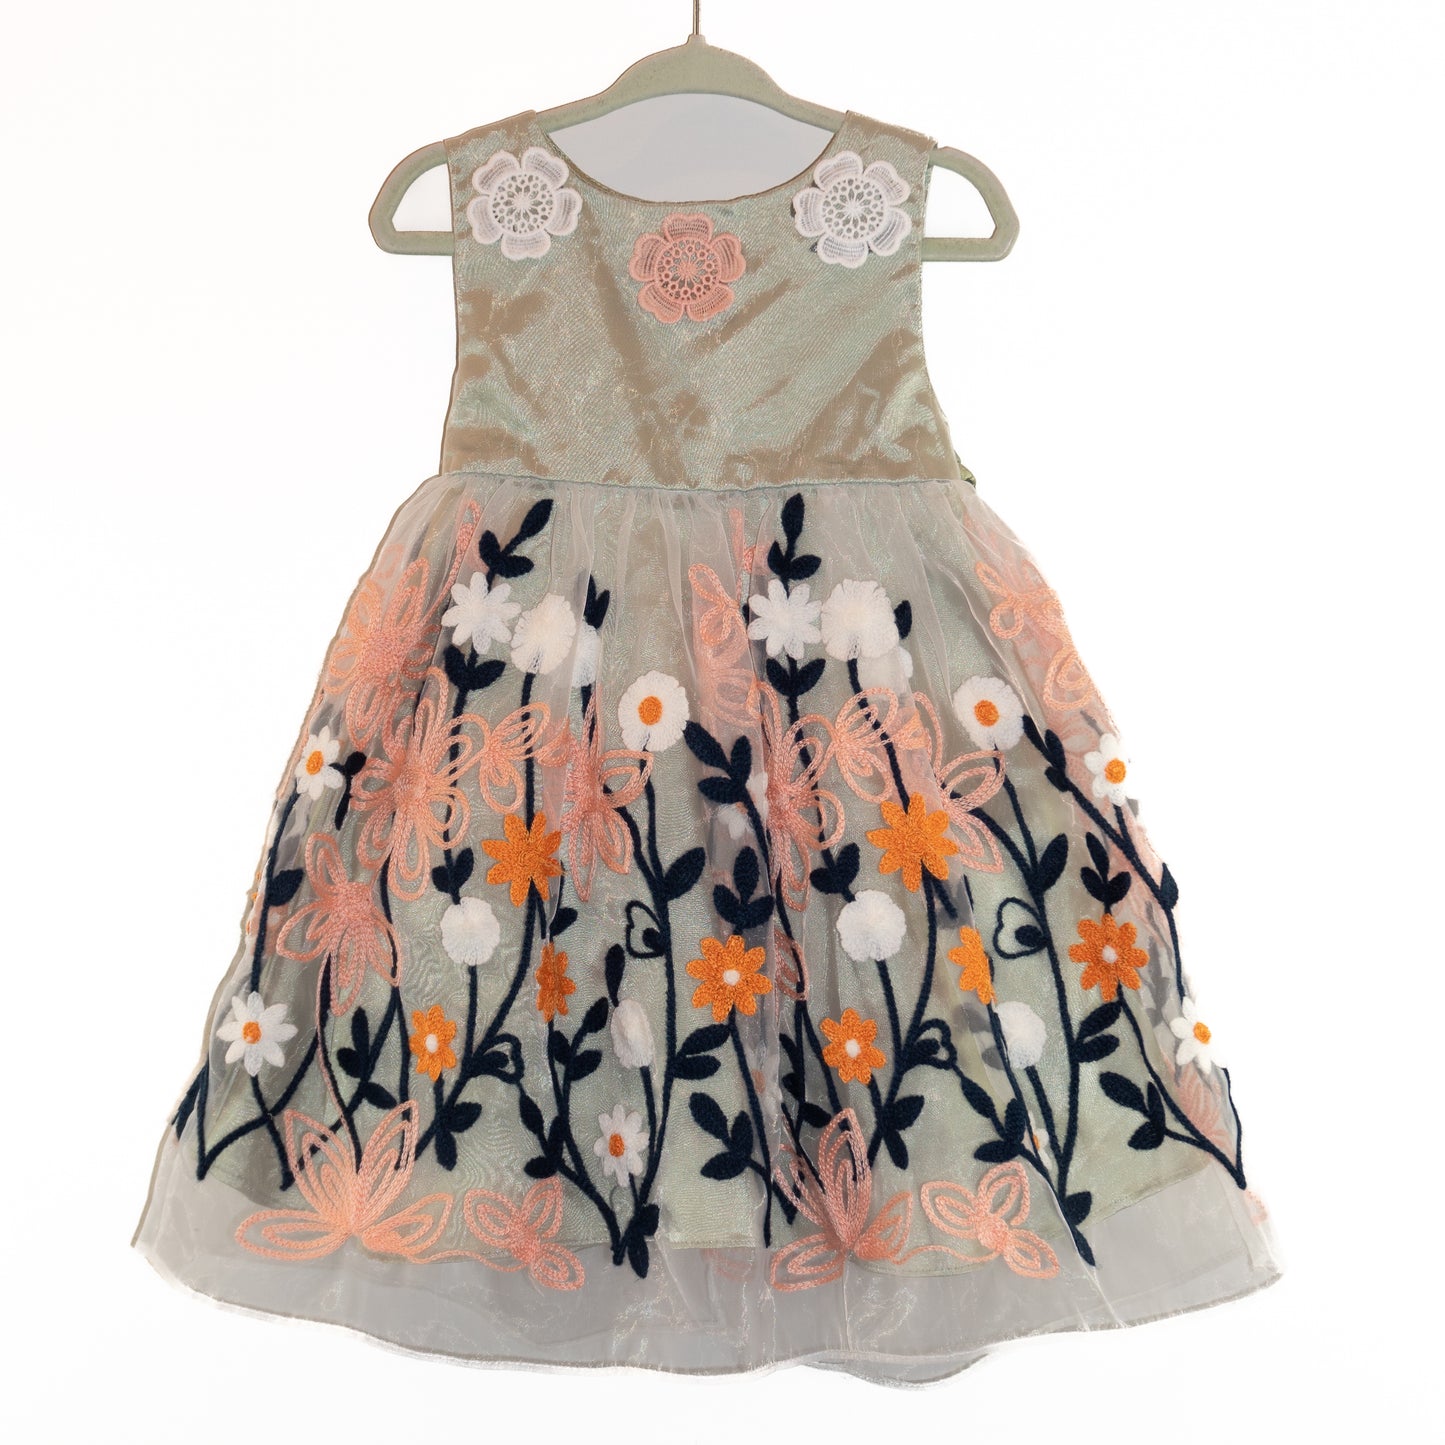 Embroidered Tulle Dress Size 1-2 years